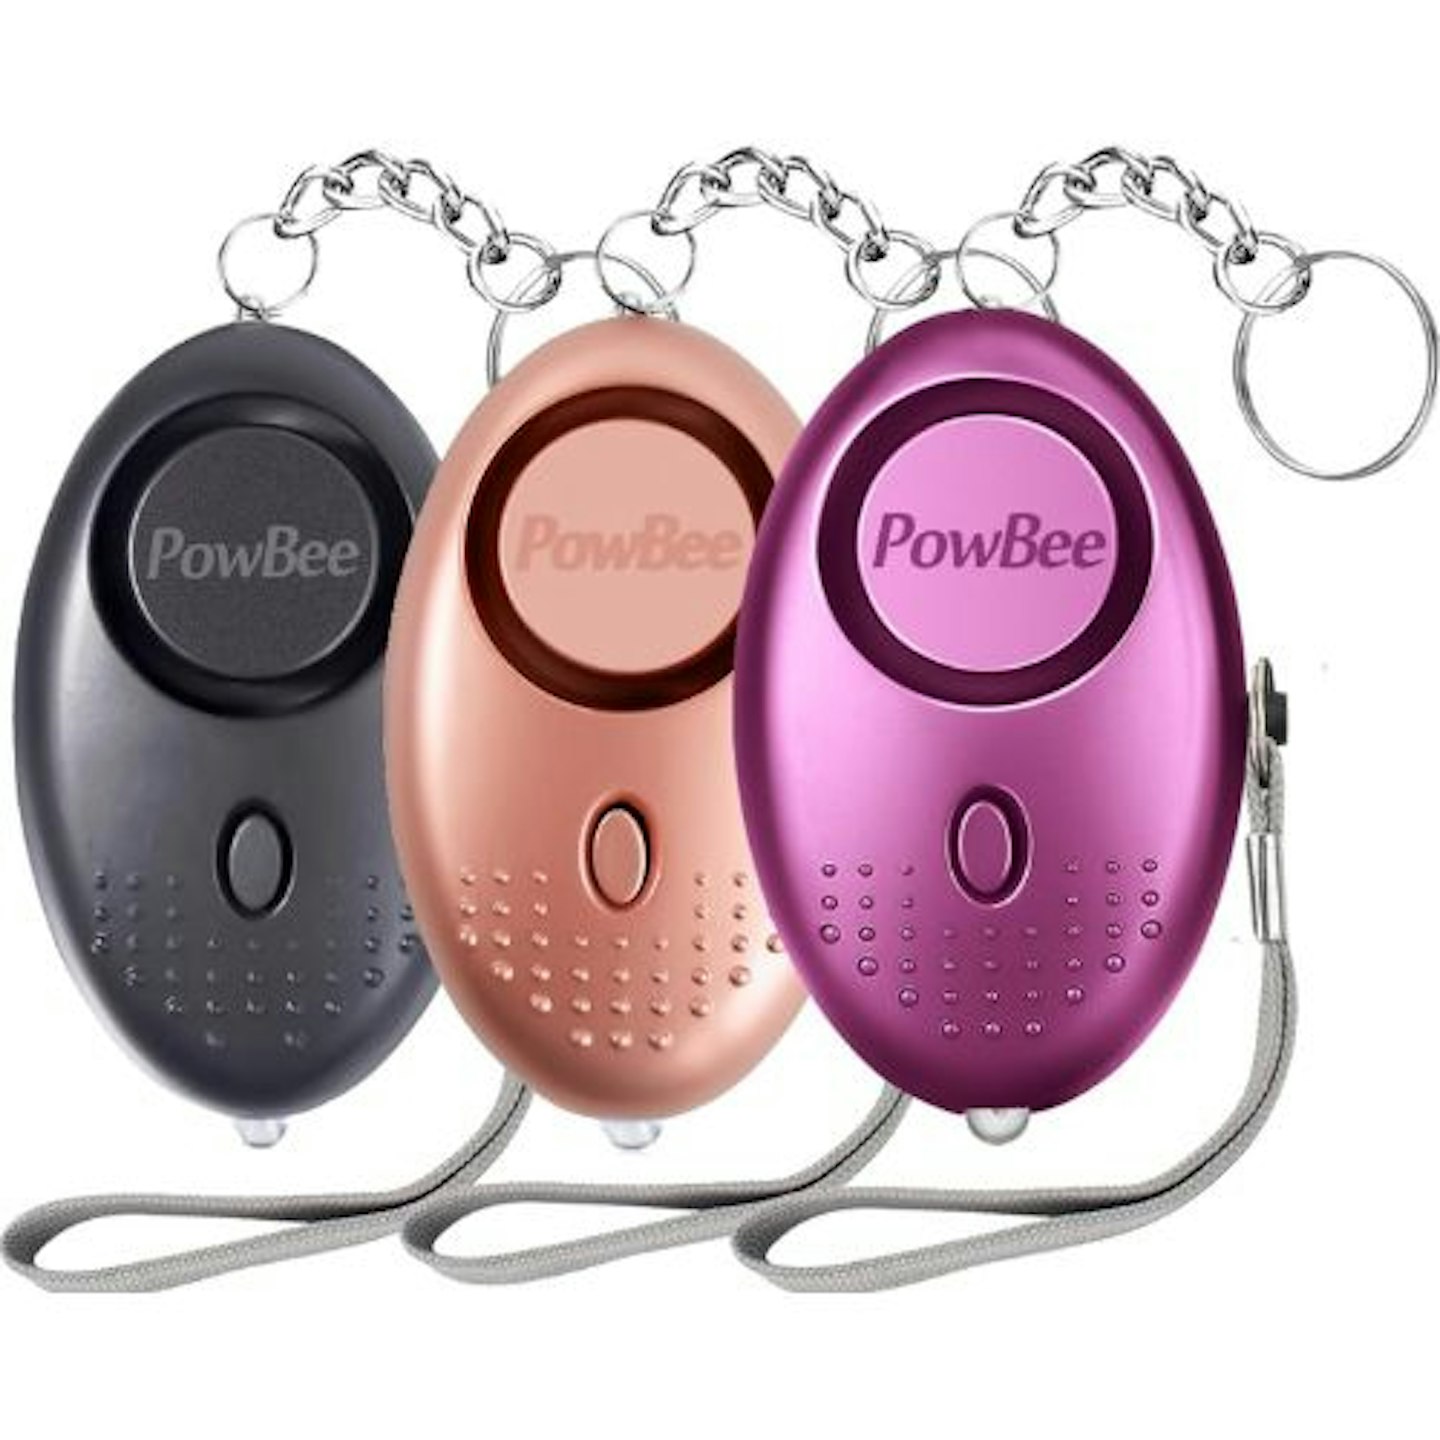 Powerbee Personal Alarms For Women